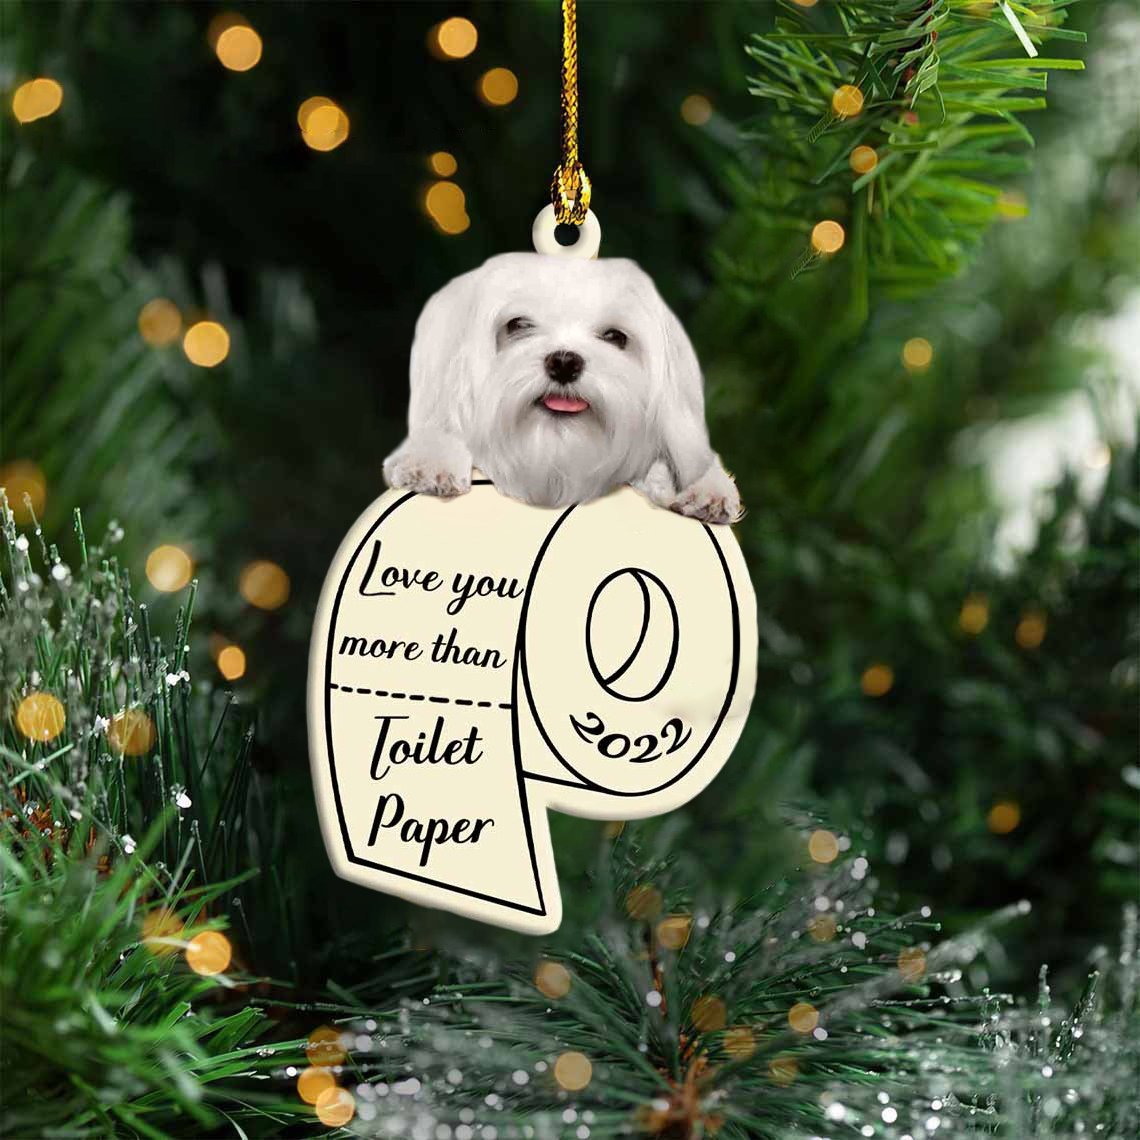 Maltese Love You More Than Toilet Paper 2022 Hanging Ornament